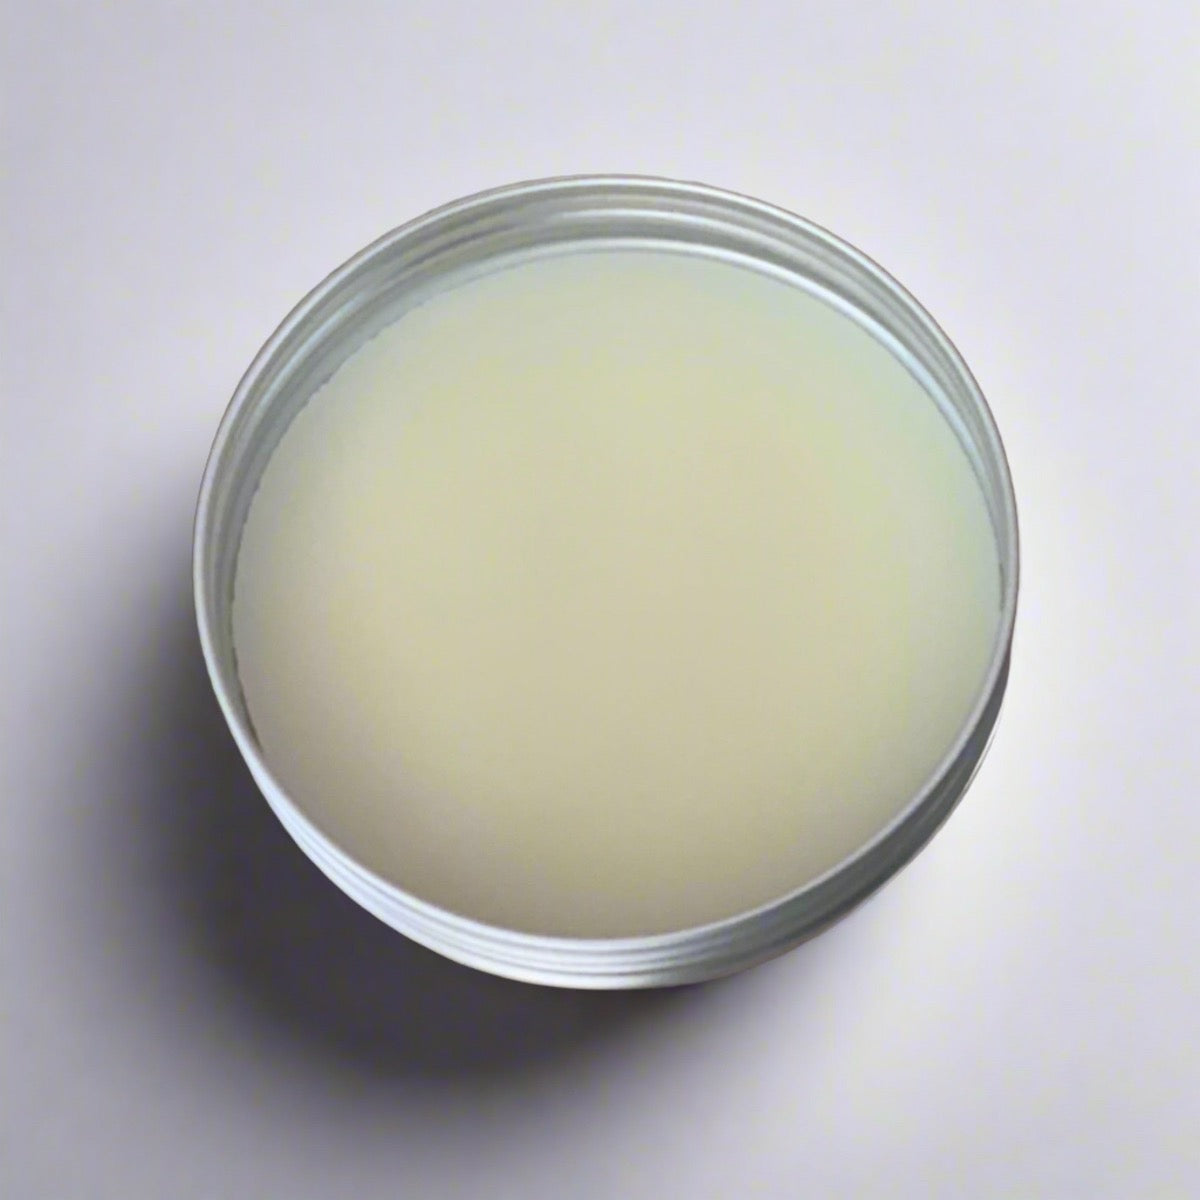 2 oz tin of lemon butter face cream showcasing its light yellow color and creamy texture